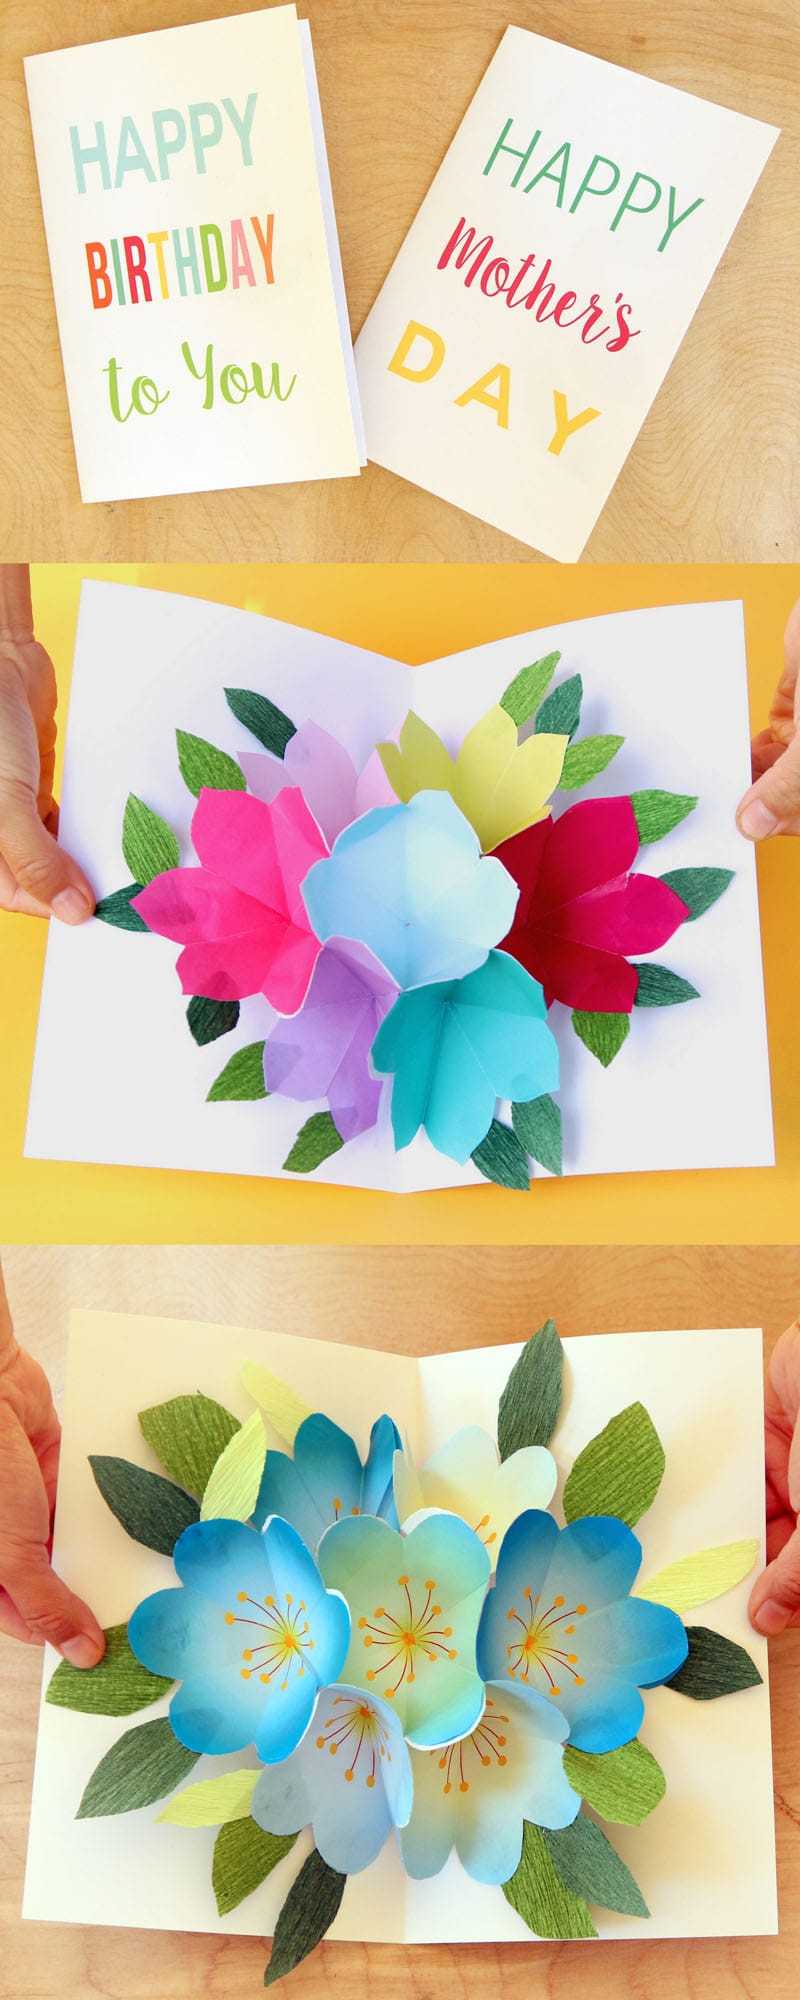 Free Printable Happy Birthday Card With Pop Up Bouquet – A With Regard To Printable Pop Up Card Templates Free